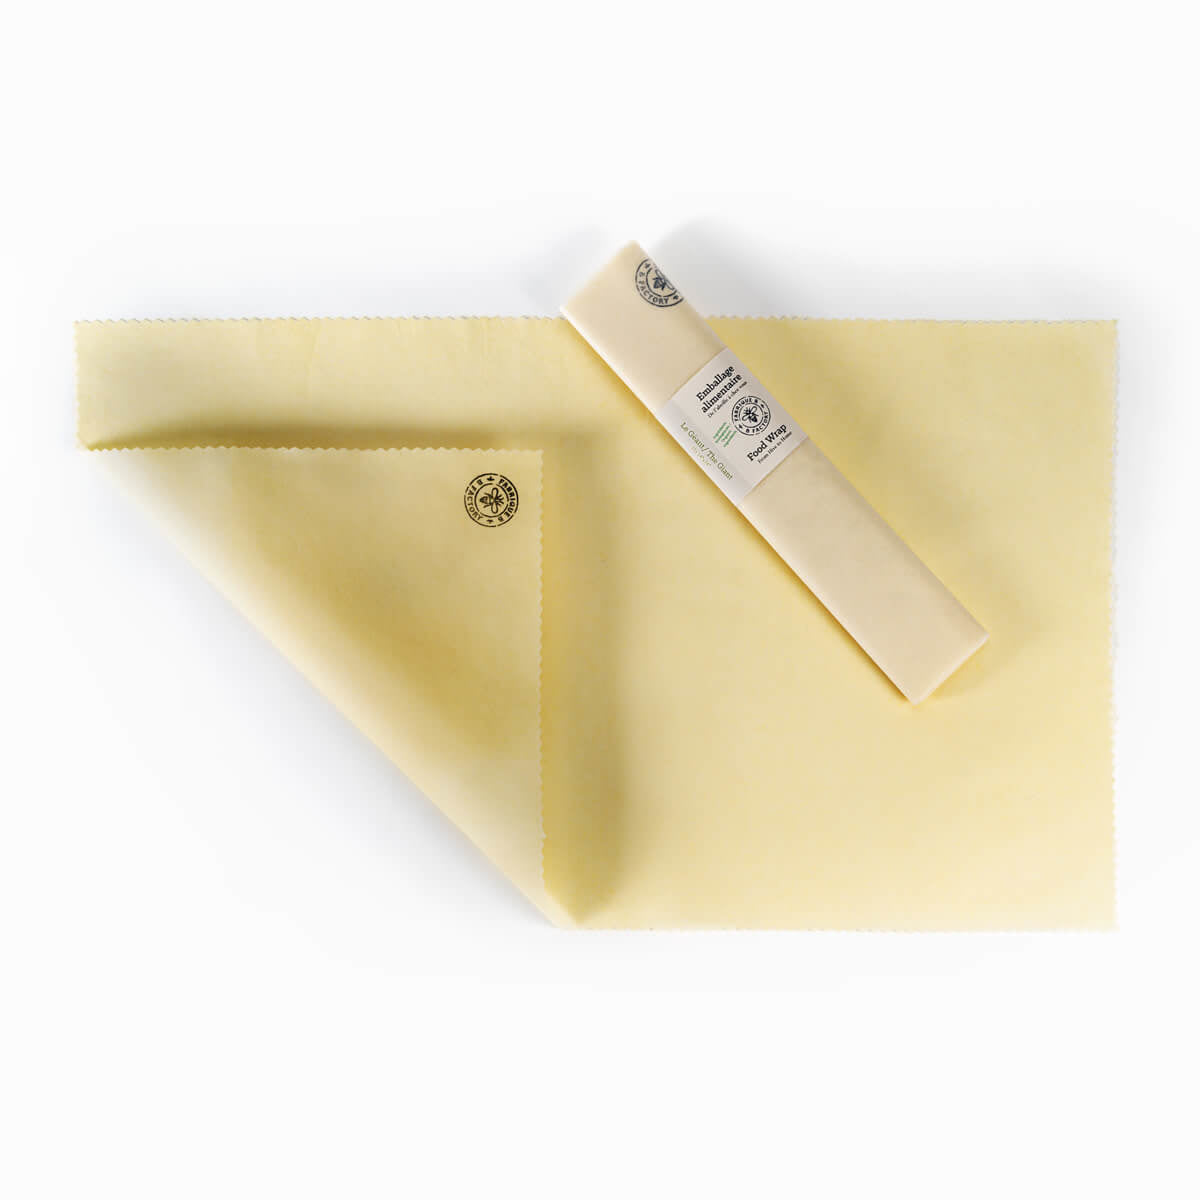 Giant reusable beeswax wrap with B Factory logo on bottom-left corner